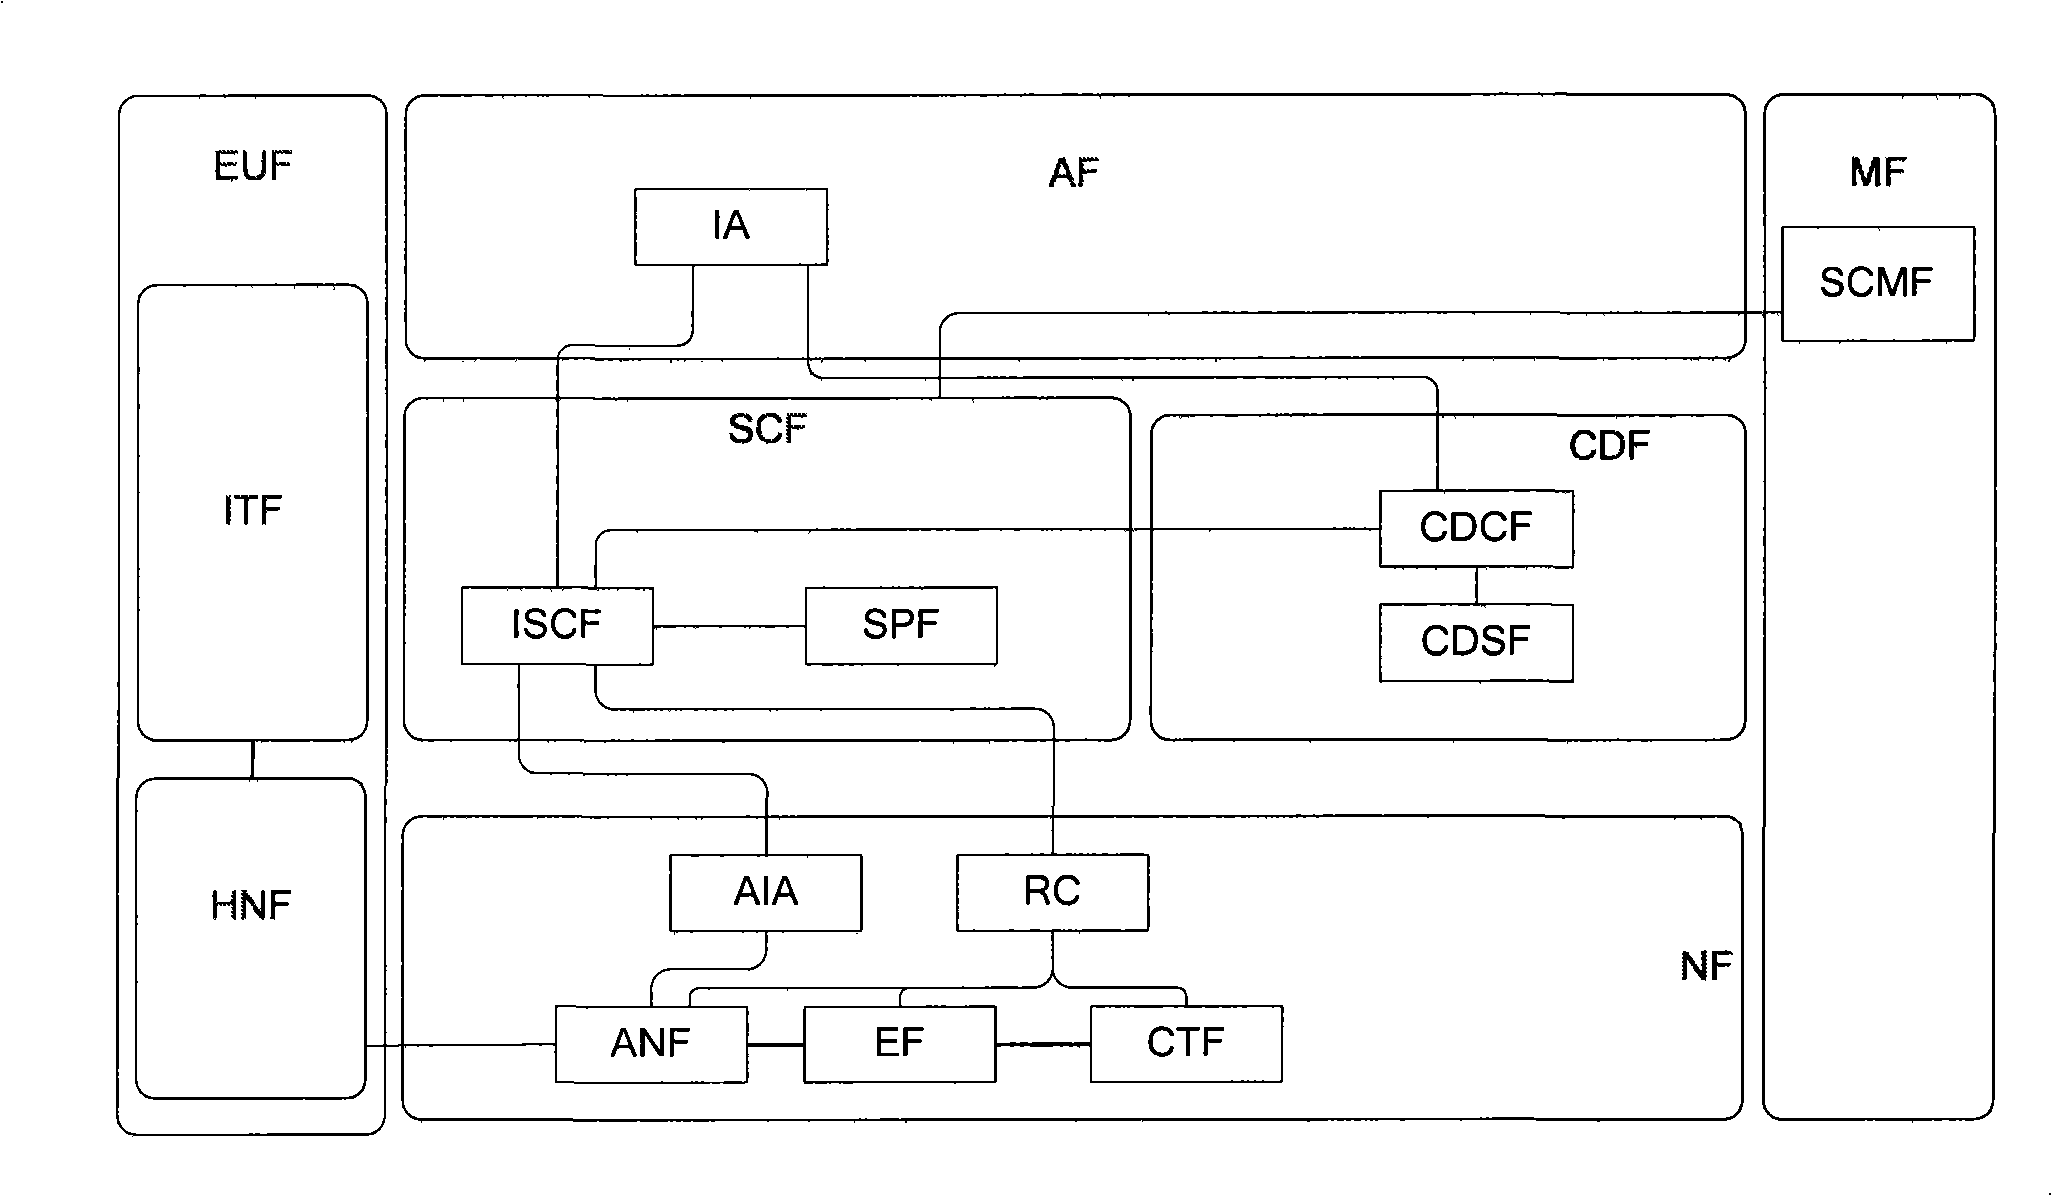 IPTV network interconnection architecture and interconnection method